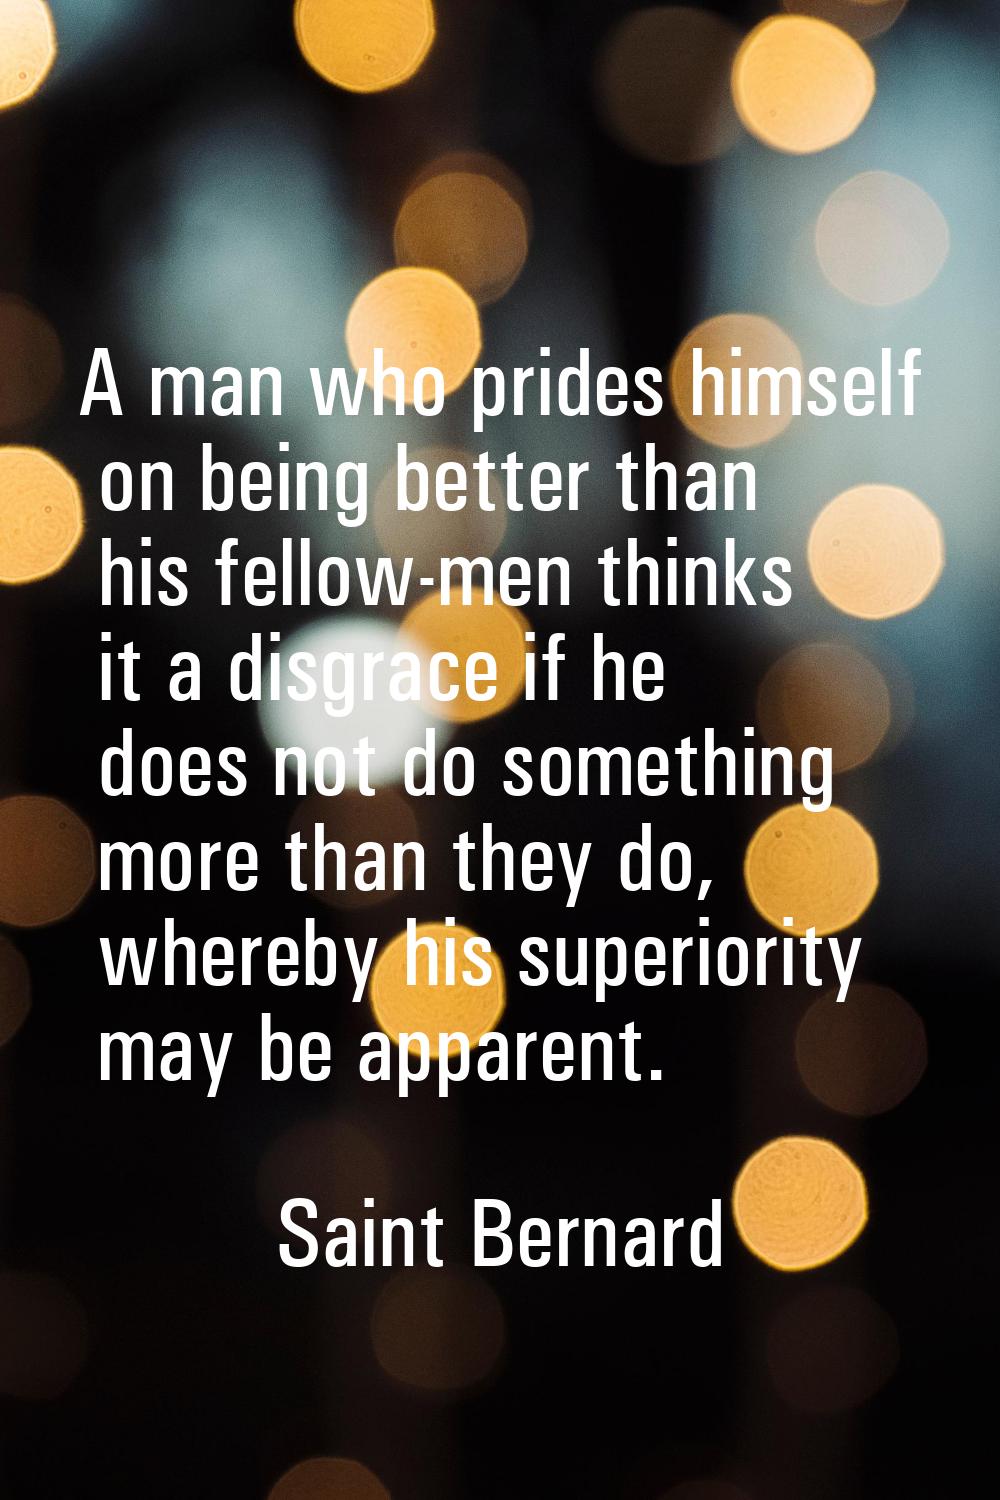 A man who prides himself on being better than his fellow-men thinks it a disgrace if he does not do